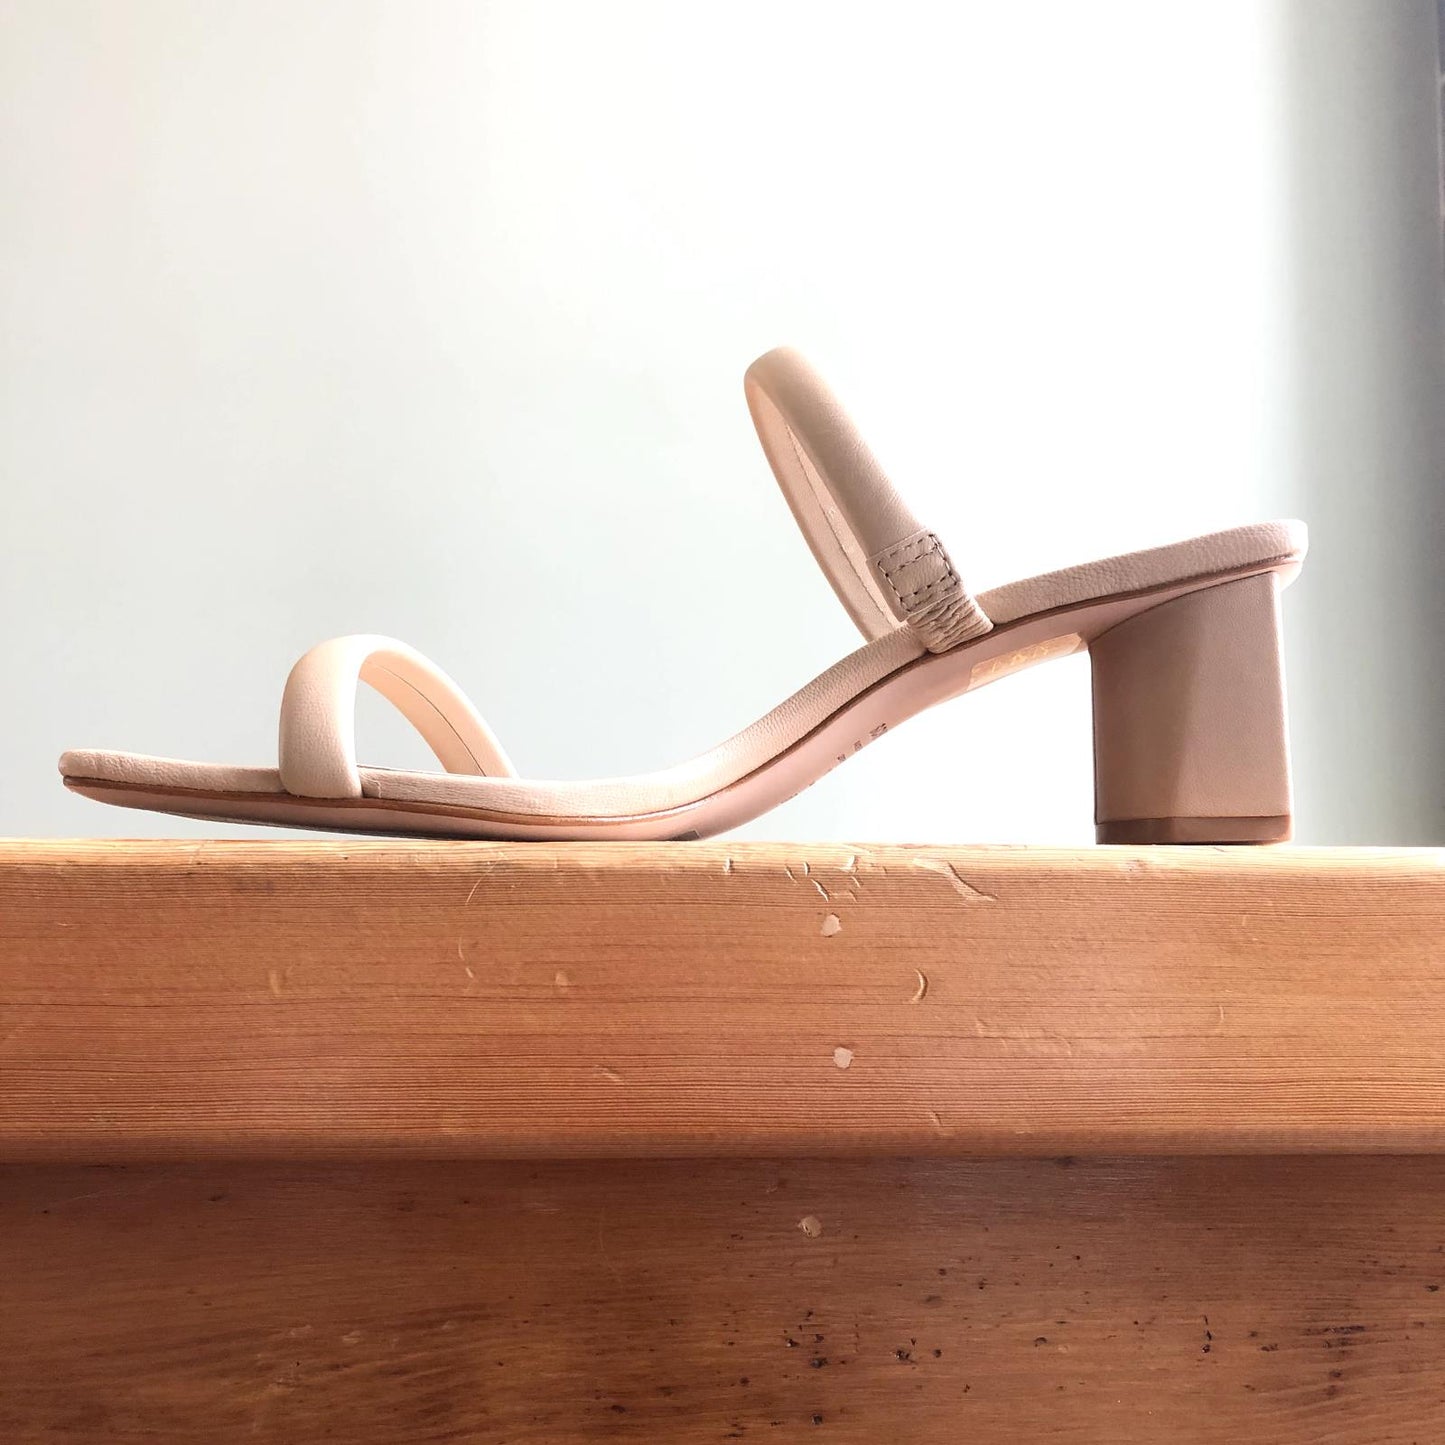 11 - Schutz Nude Ully Lo Leather Strappy Heels Sandals NEW w/ Box 0505FB